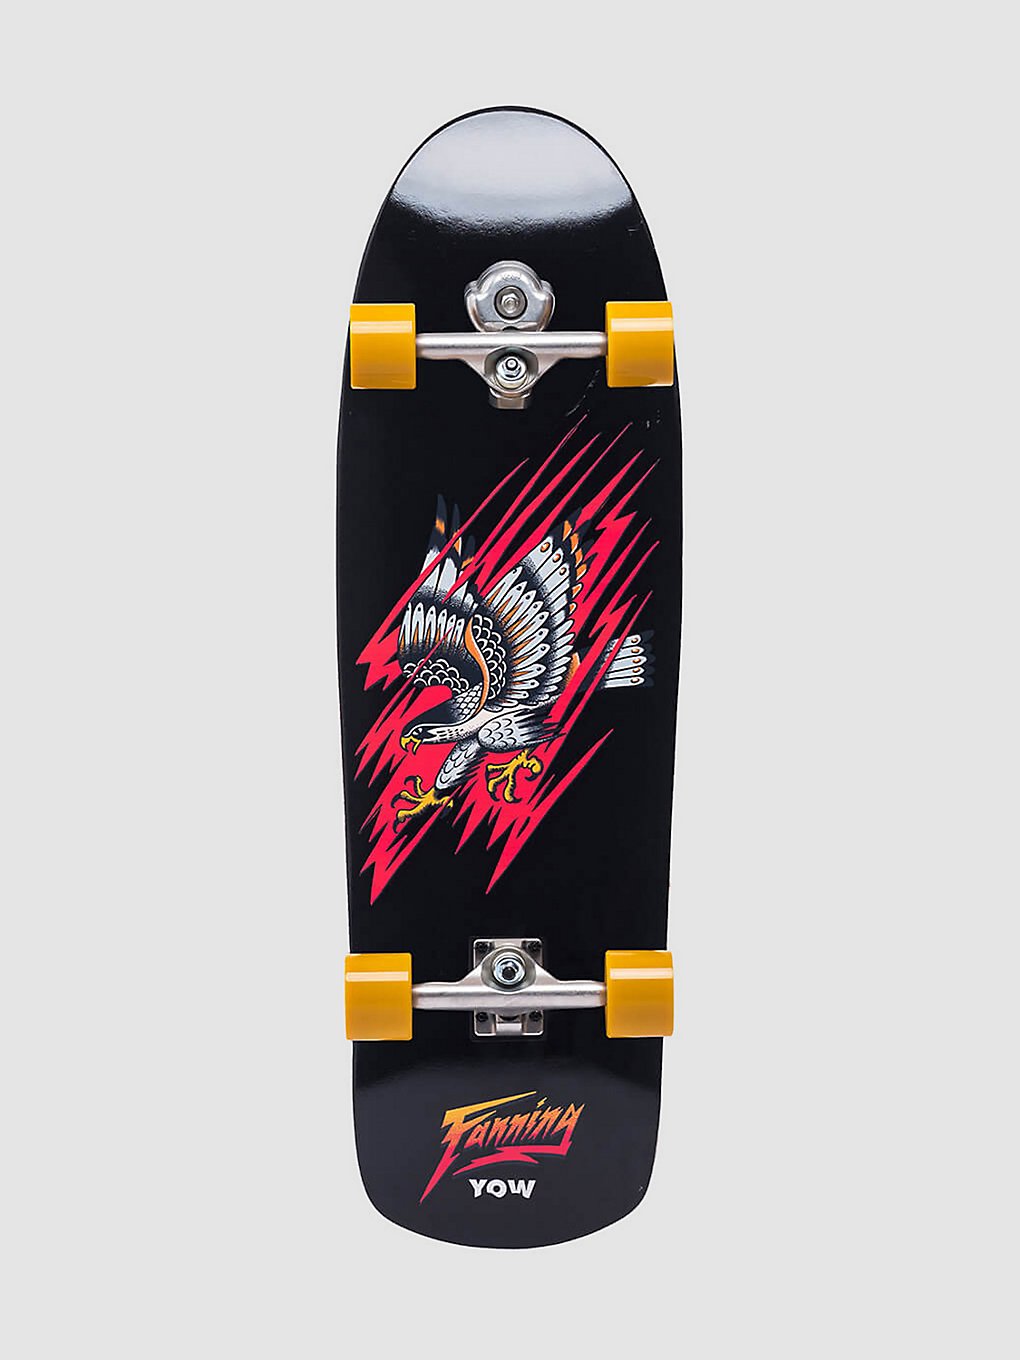 YOW Fanning Falcon Performer 33.5" Signature Surfskate patroon